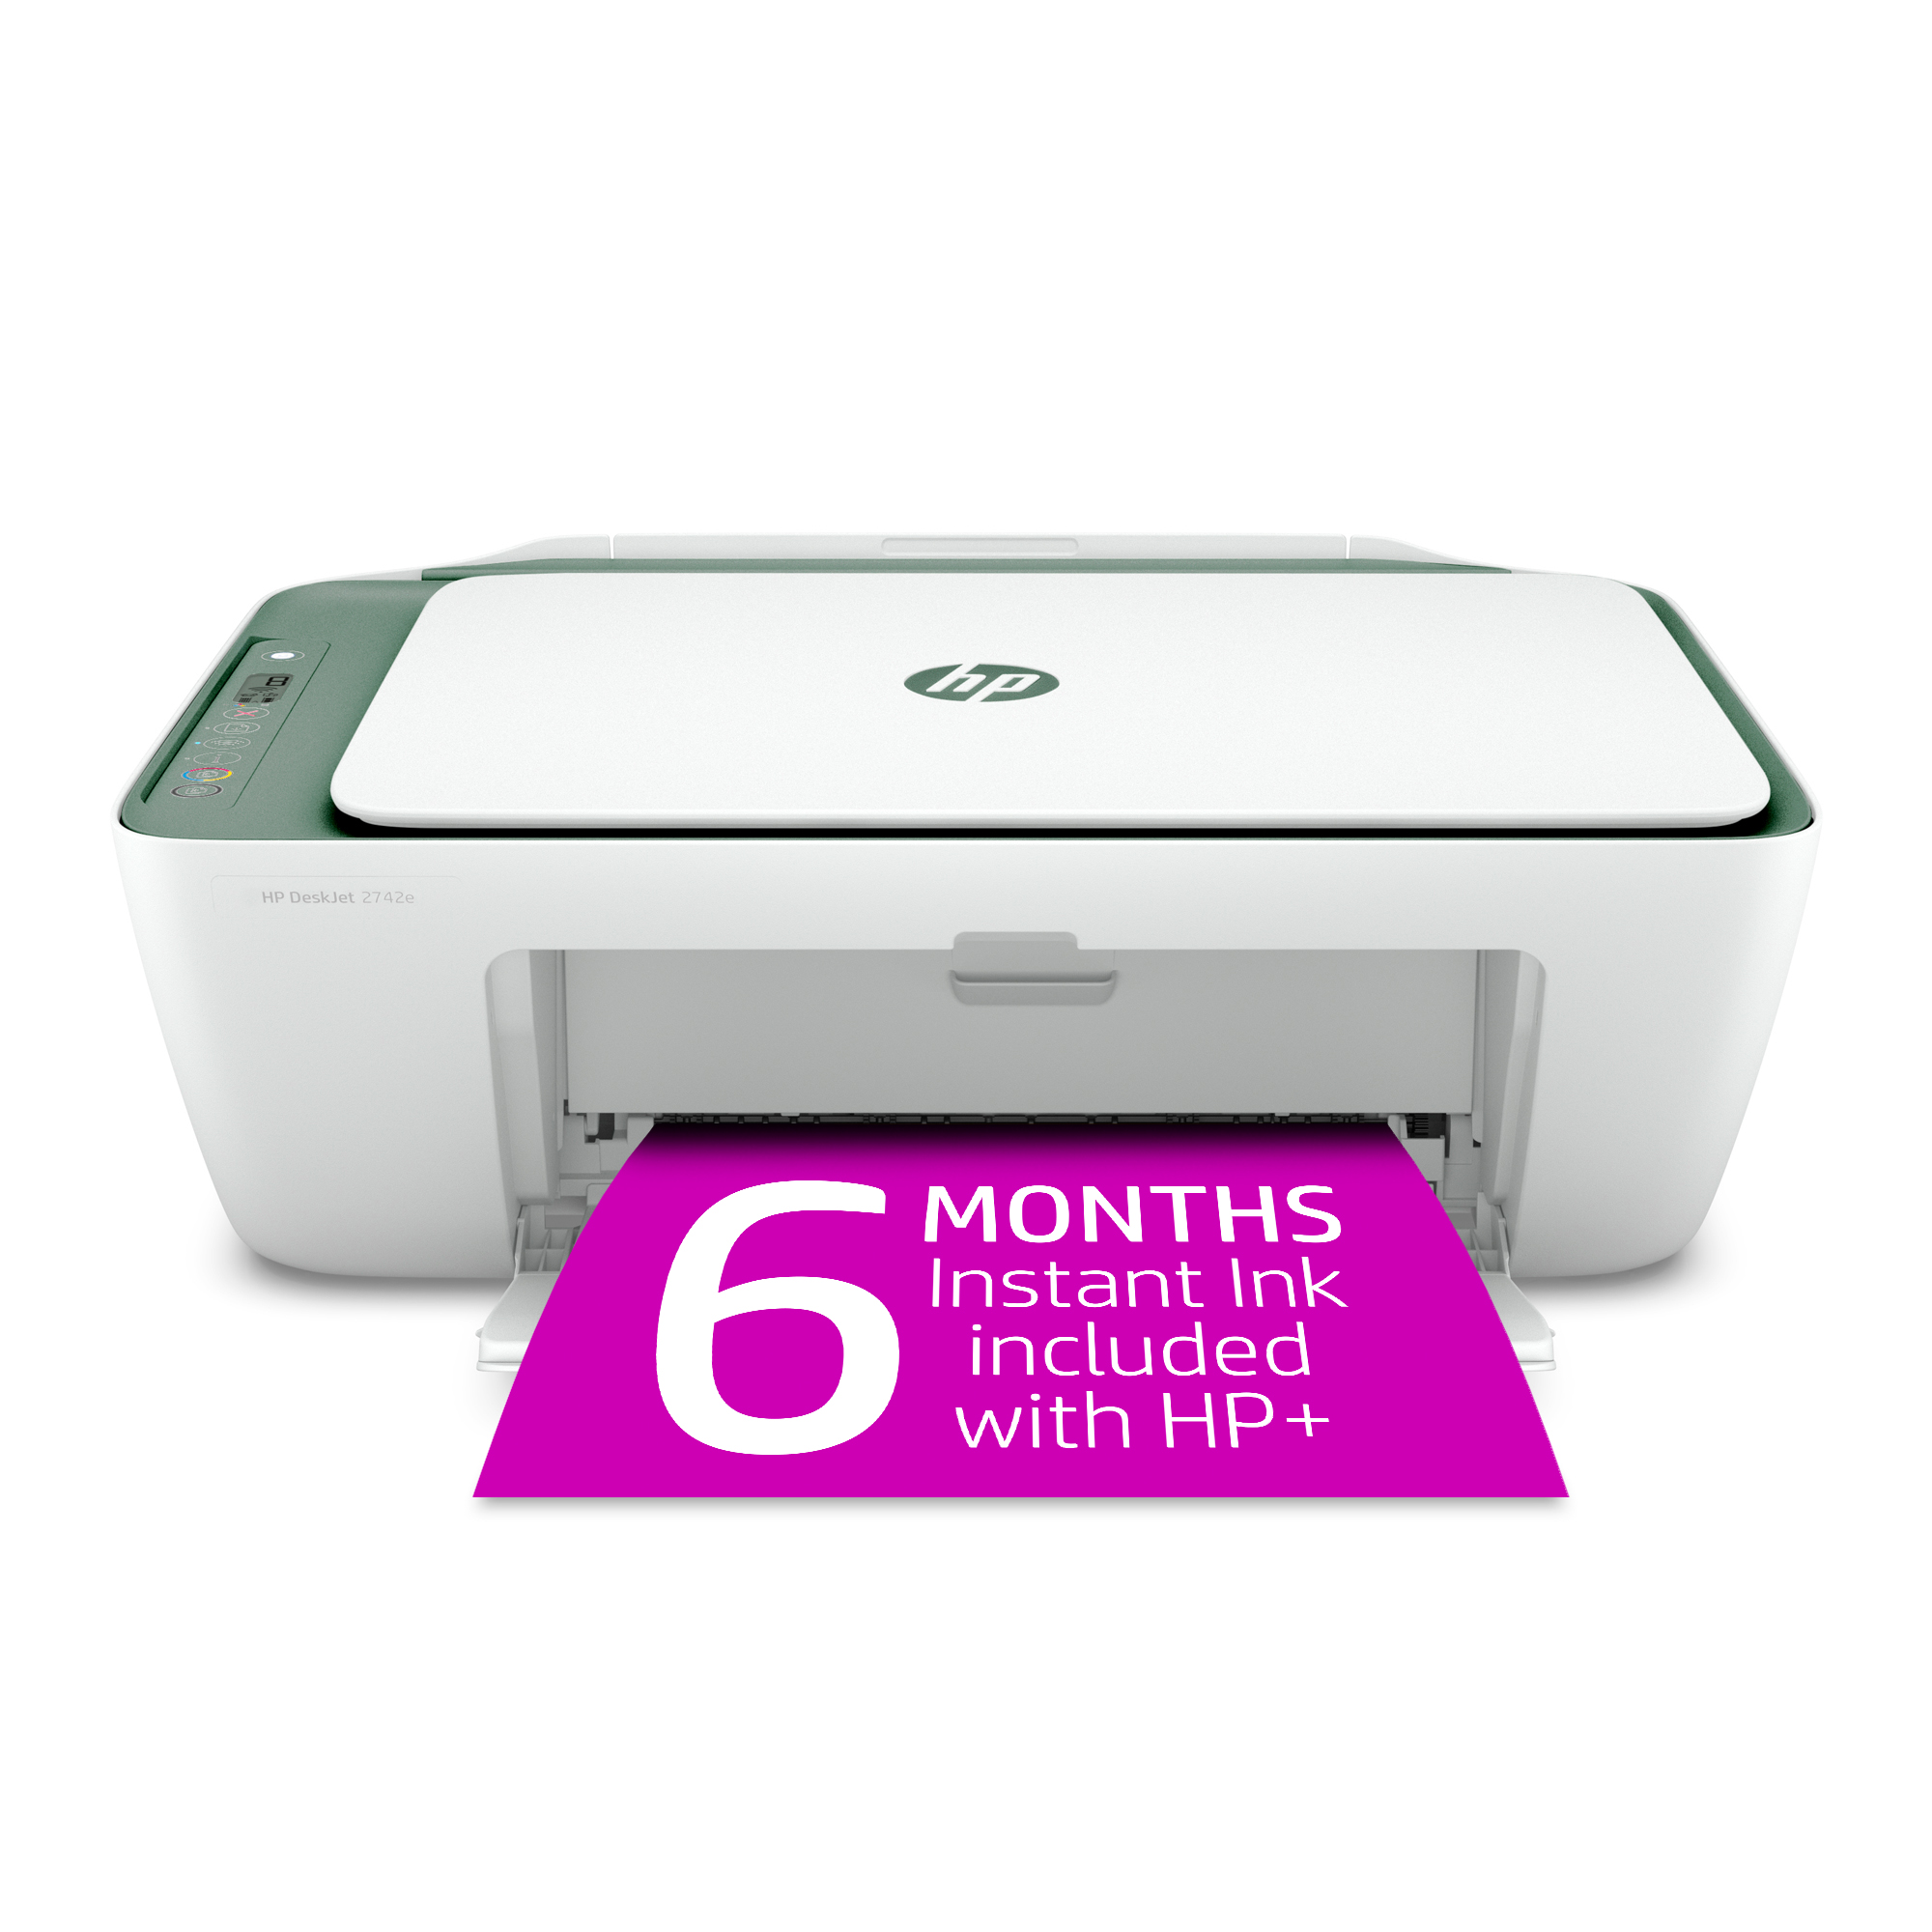 HP DeskJet 2742e Wireless Color All-in-One Inkjet Printer (Green Matcha) with 6 months Instant Ink Included with HP+ - image 1 of 10